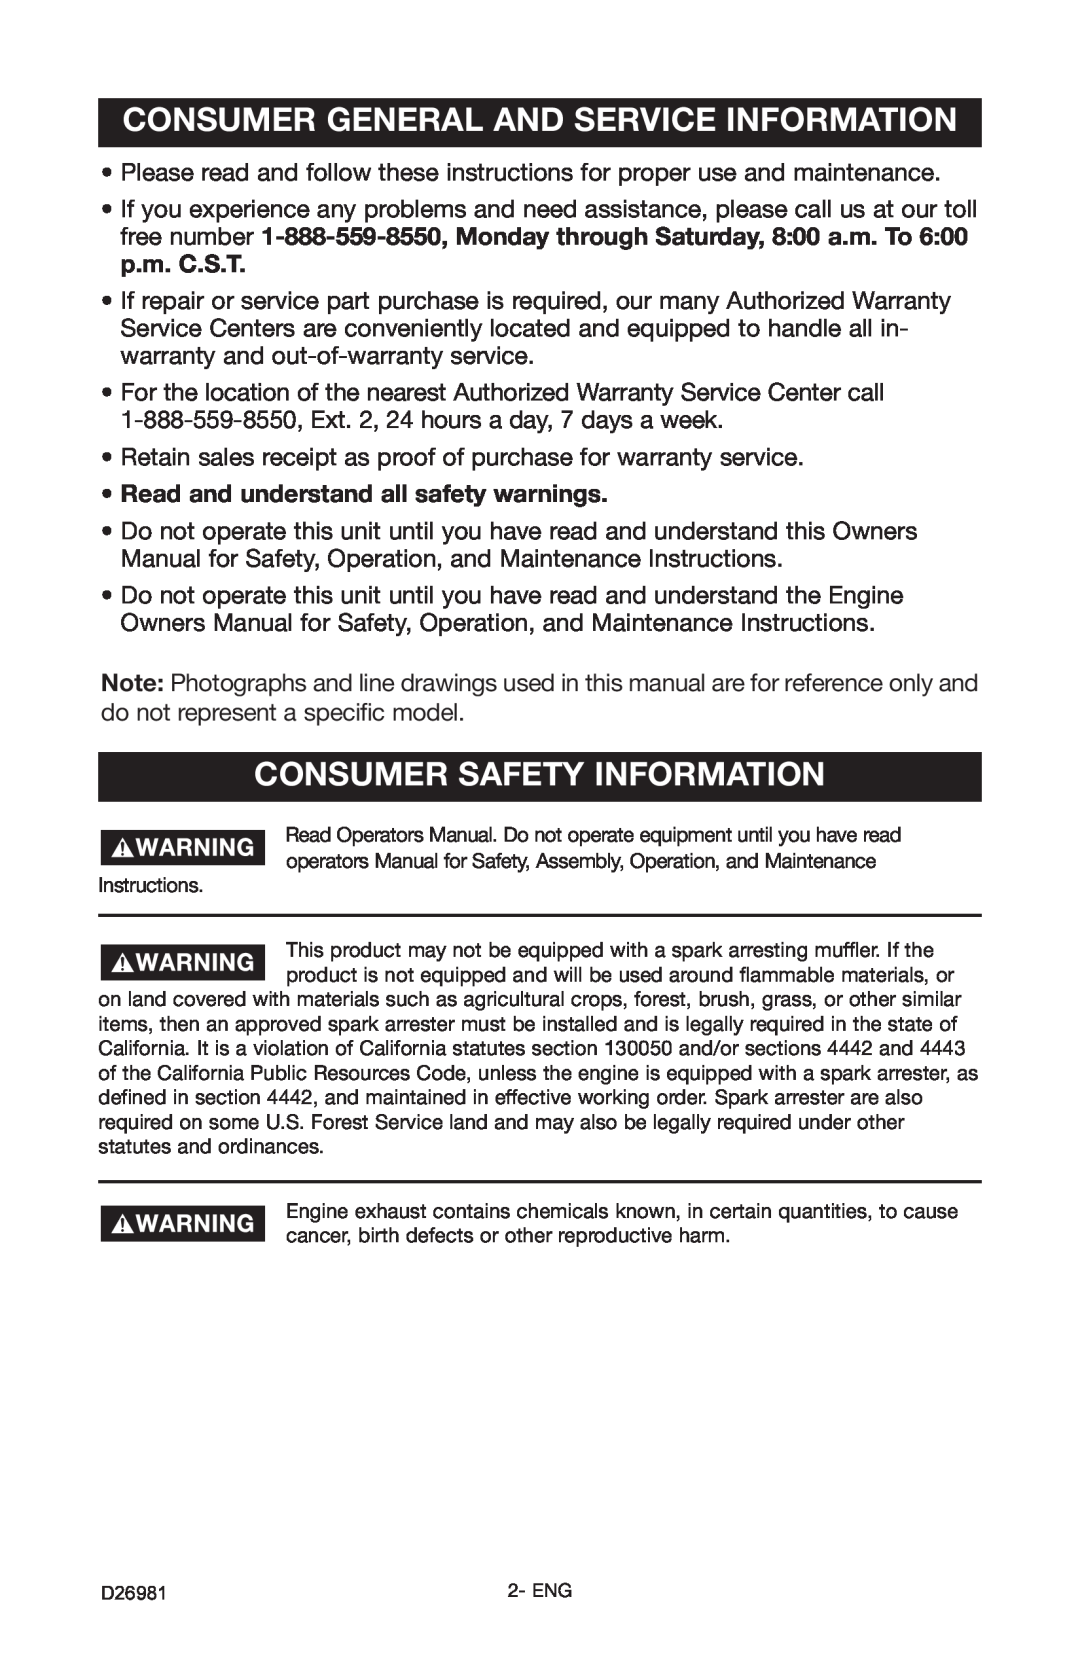 Porter-Cable D26981-028-0 instruction manual Consumer General And Service Information, Consumer Safety Information 